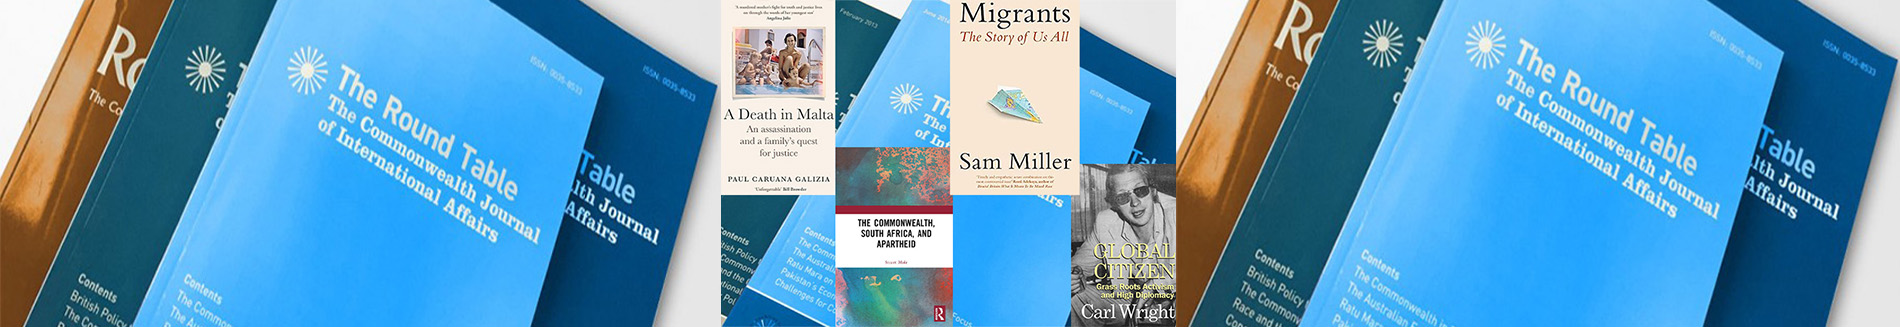 Books recommended by the Commonwealth Round Table Journal Booskhelf editor